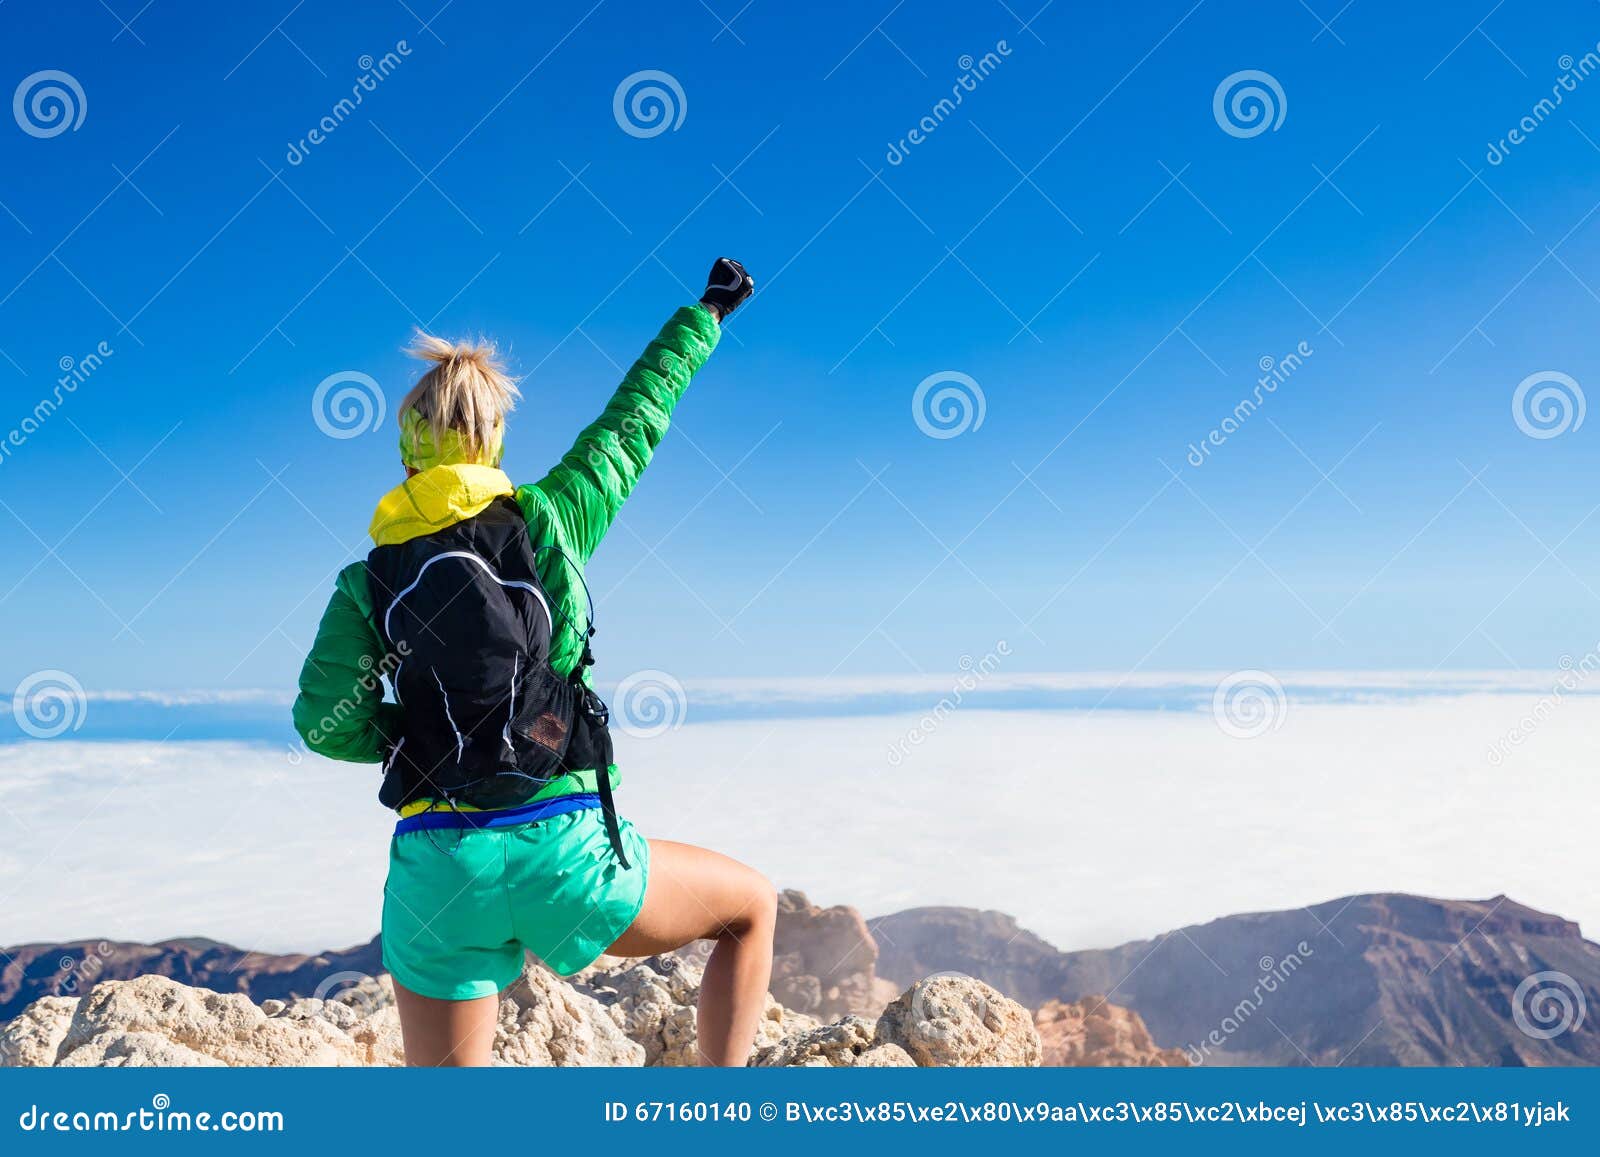 133,908 Woman Hiking Mountain Stock Photos - Free & Royalty-Free Stock  Photos from Dreamstime